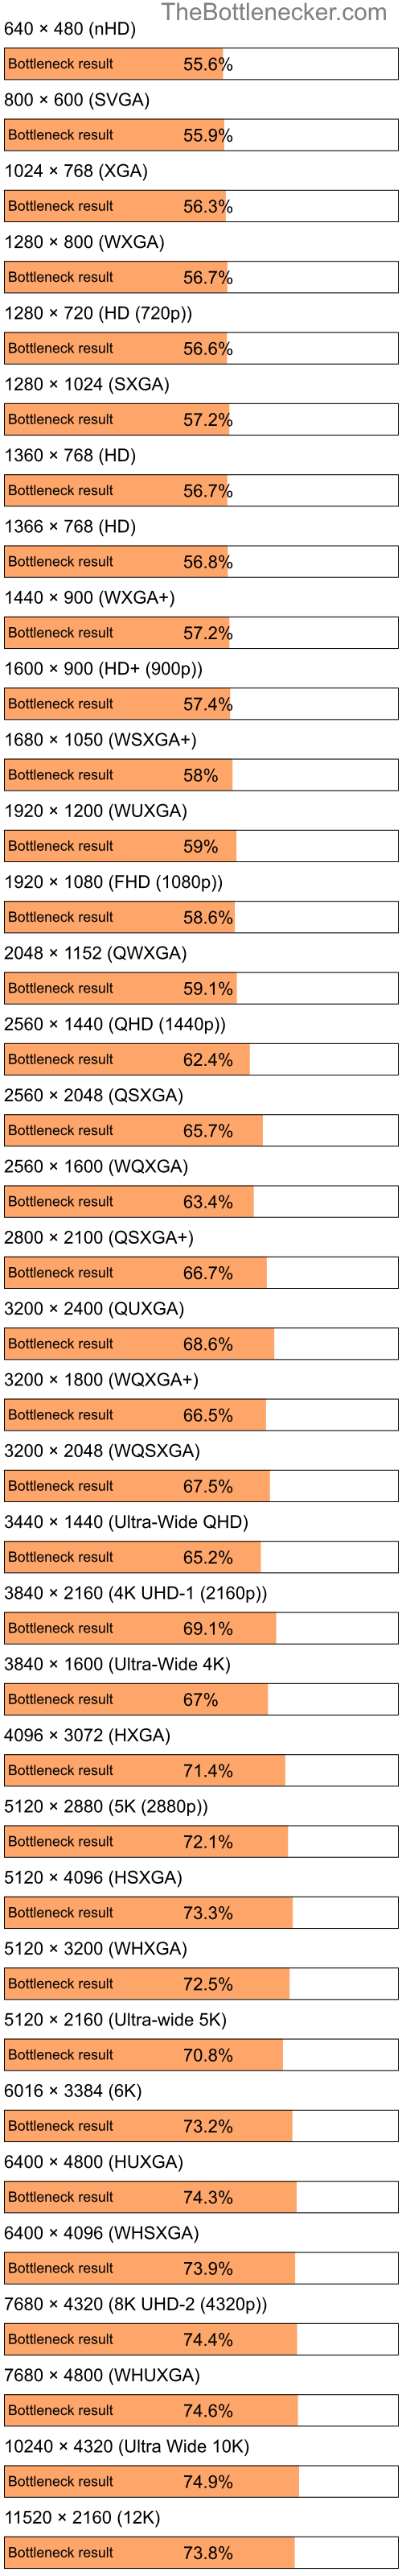 Bottleneck results by resolution for Intel Pentium 4 and AMD Mobility Radeon 4100 in Processor Intense Tasks